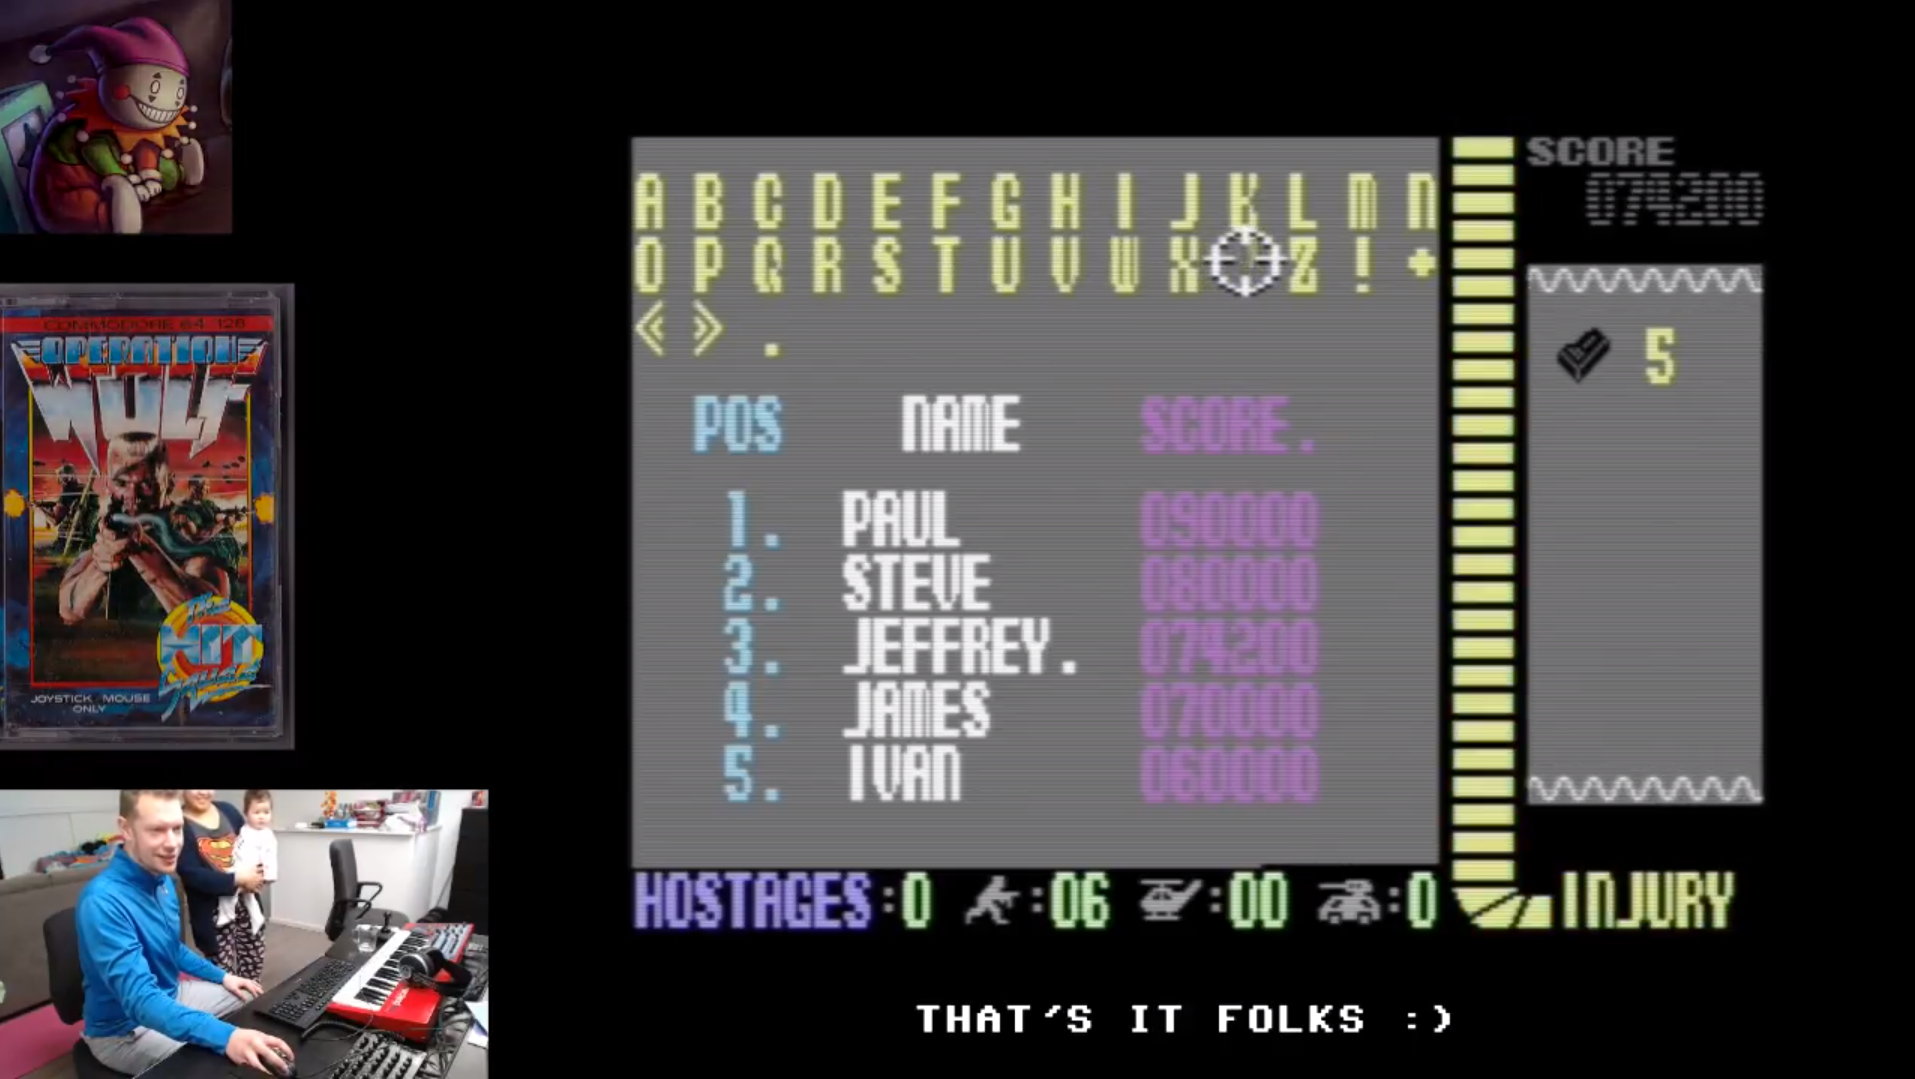 LittleJester: Operation Wolf [Continues Allowed] (Commodore 64 Emulated) 74,200 points on 2018-02-02 08:32:15